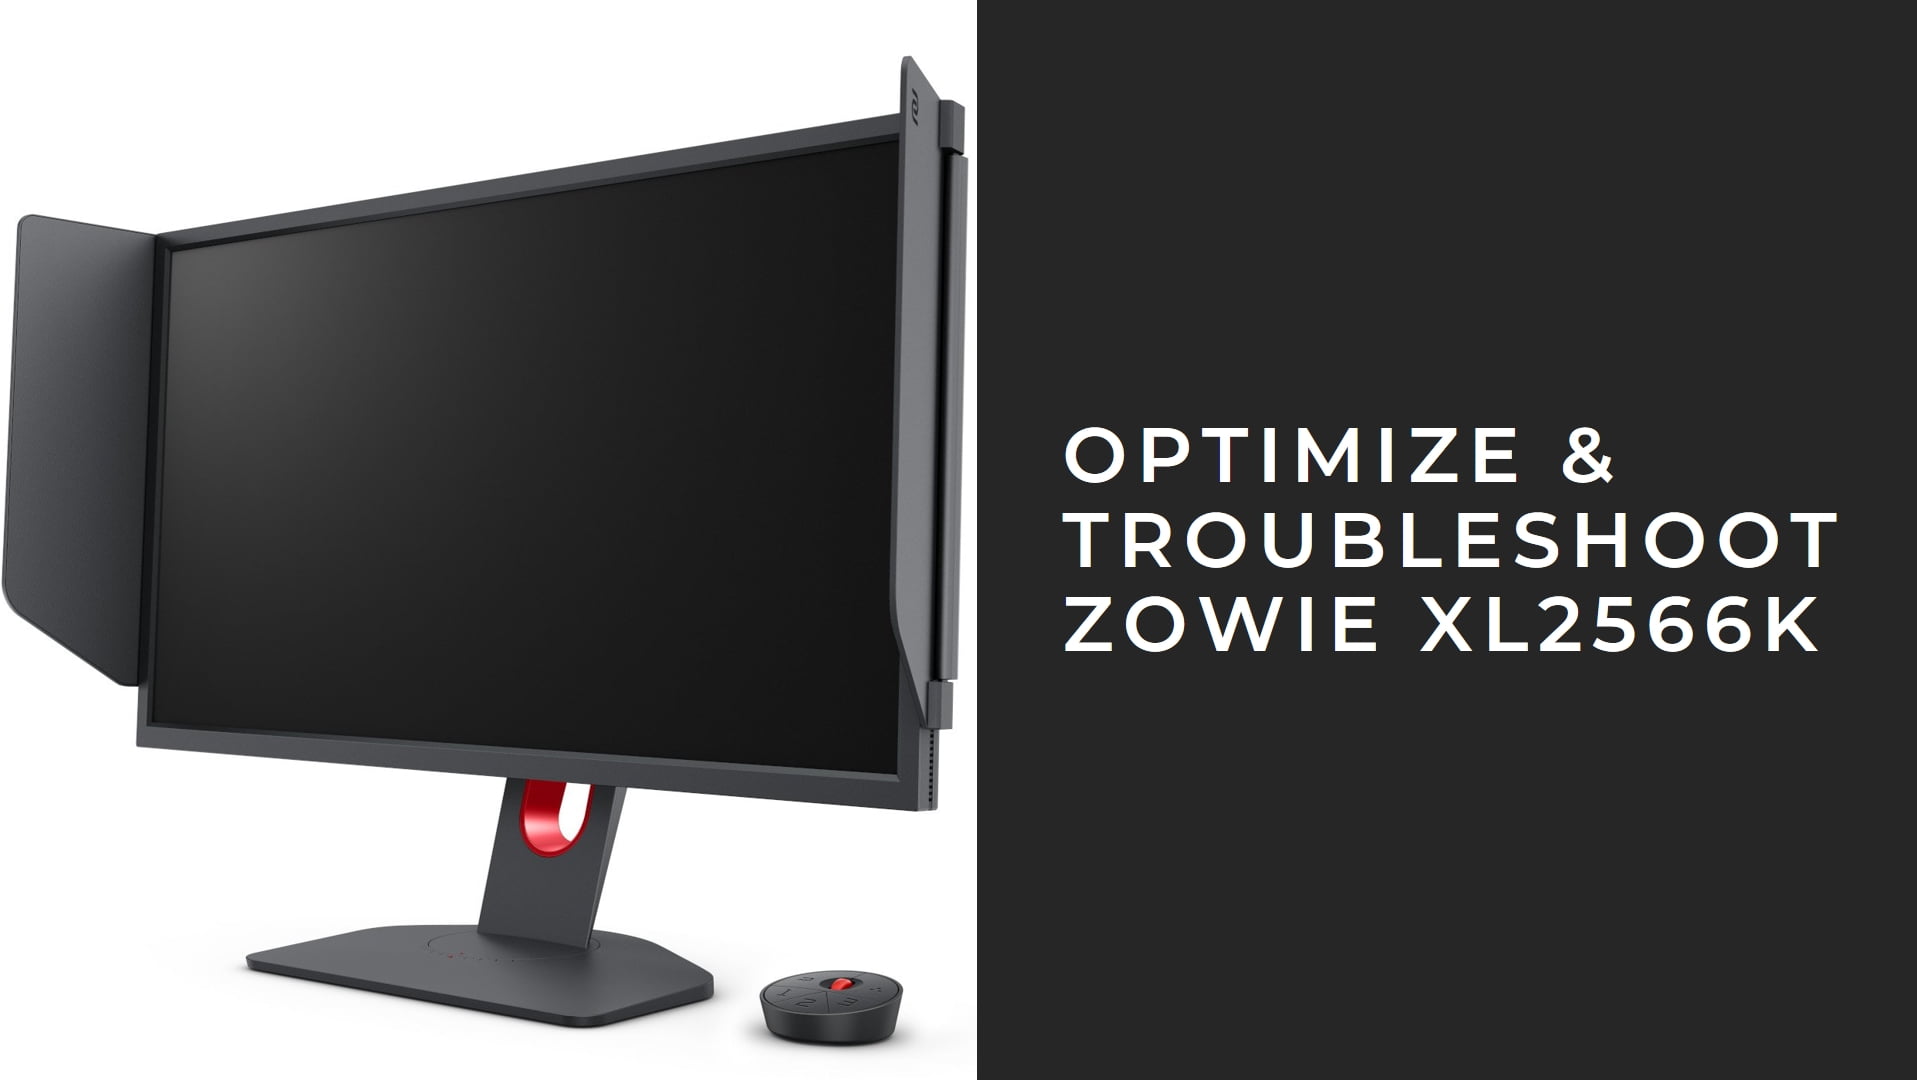 Optimize and Troubleshoot Your ZOWIE XL2566K